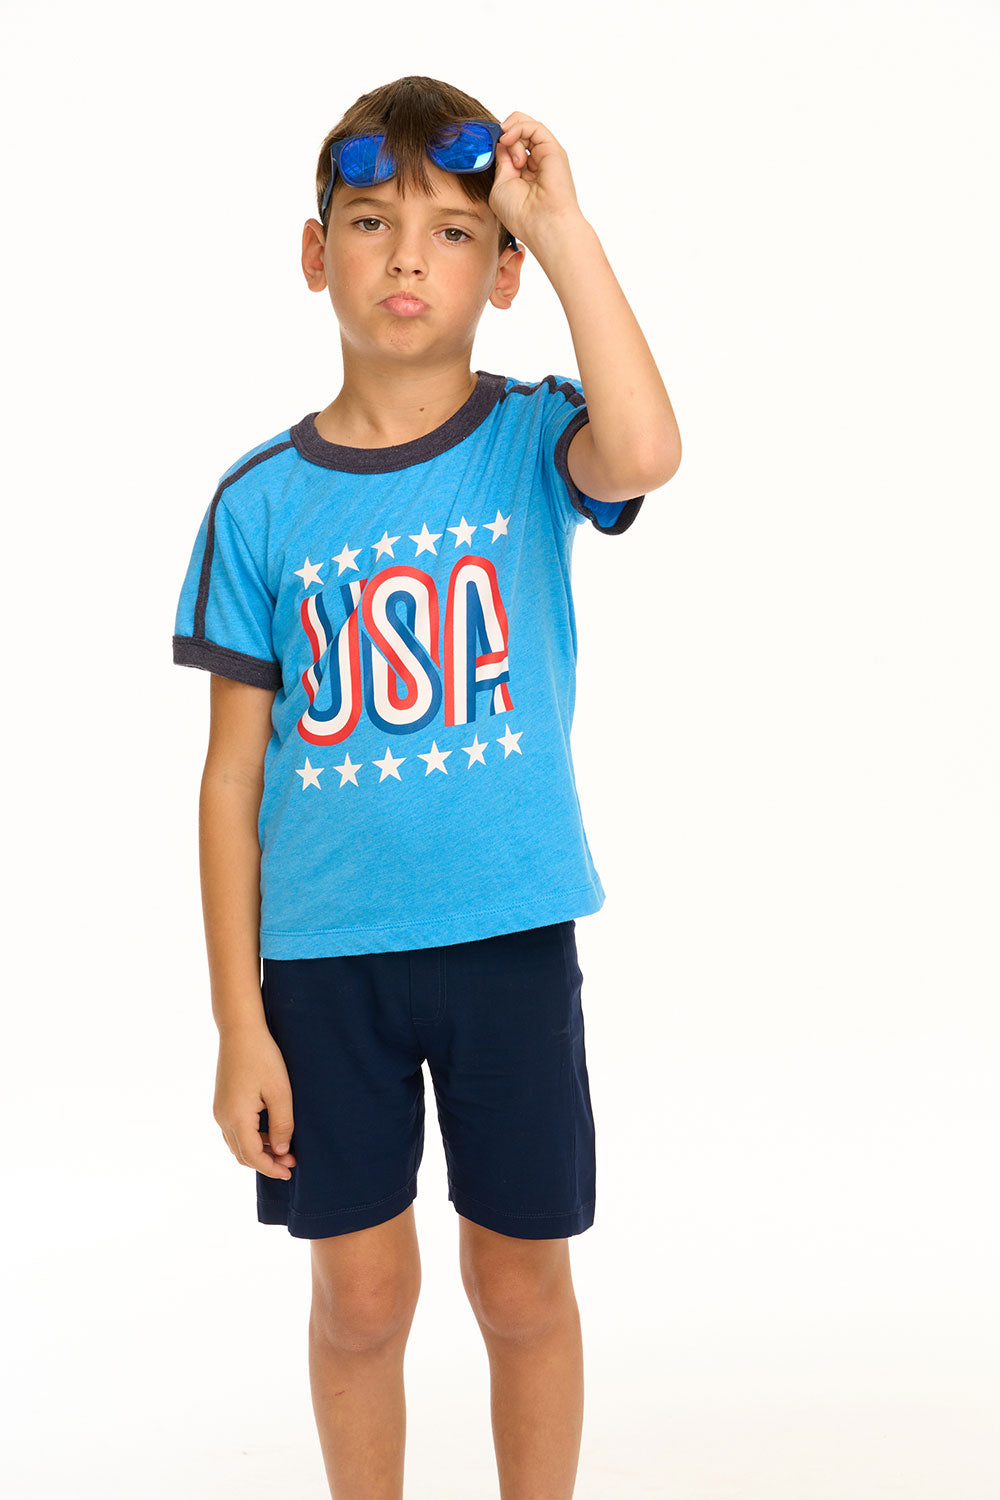 USA Recycled Vintage Jersey Tee BOYS chaserbrand